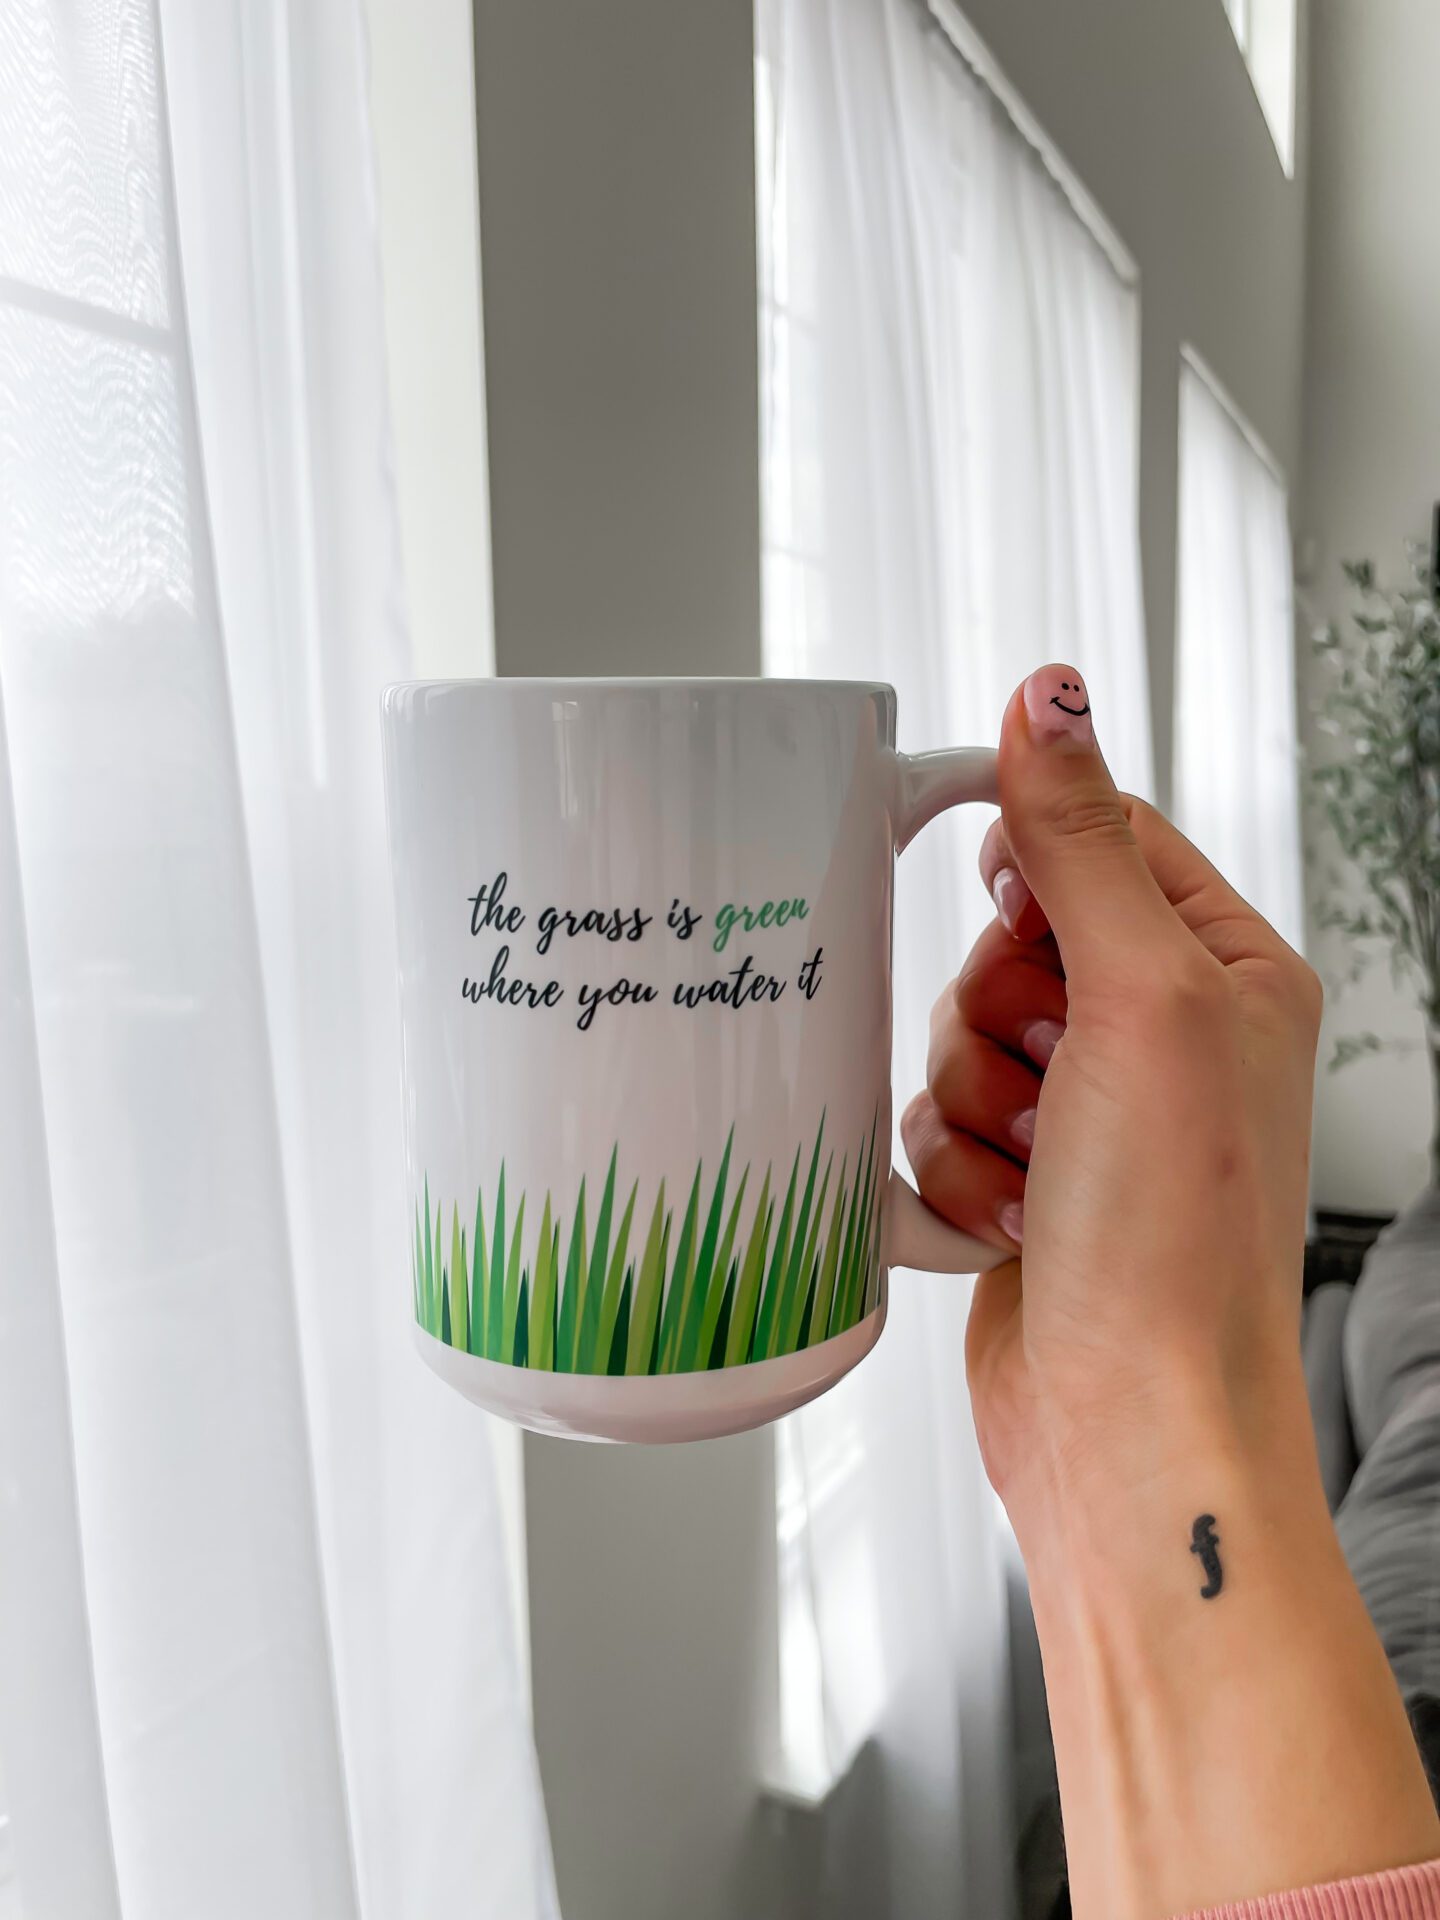 THE GRASS IS GREEN WHERE YOU WATER IT mug - MANTRA MUGS - on Coming Up Roses